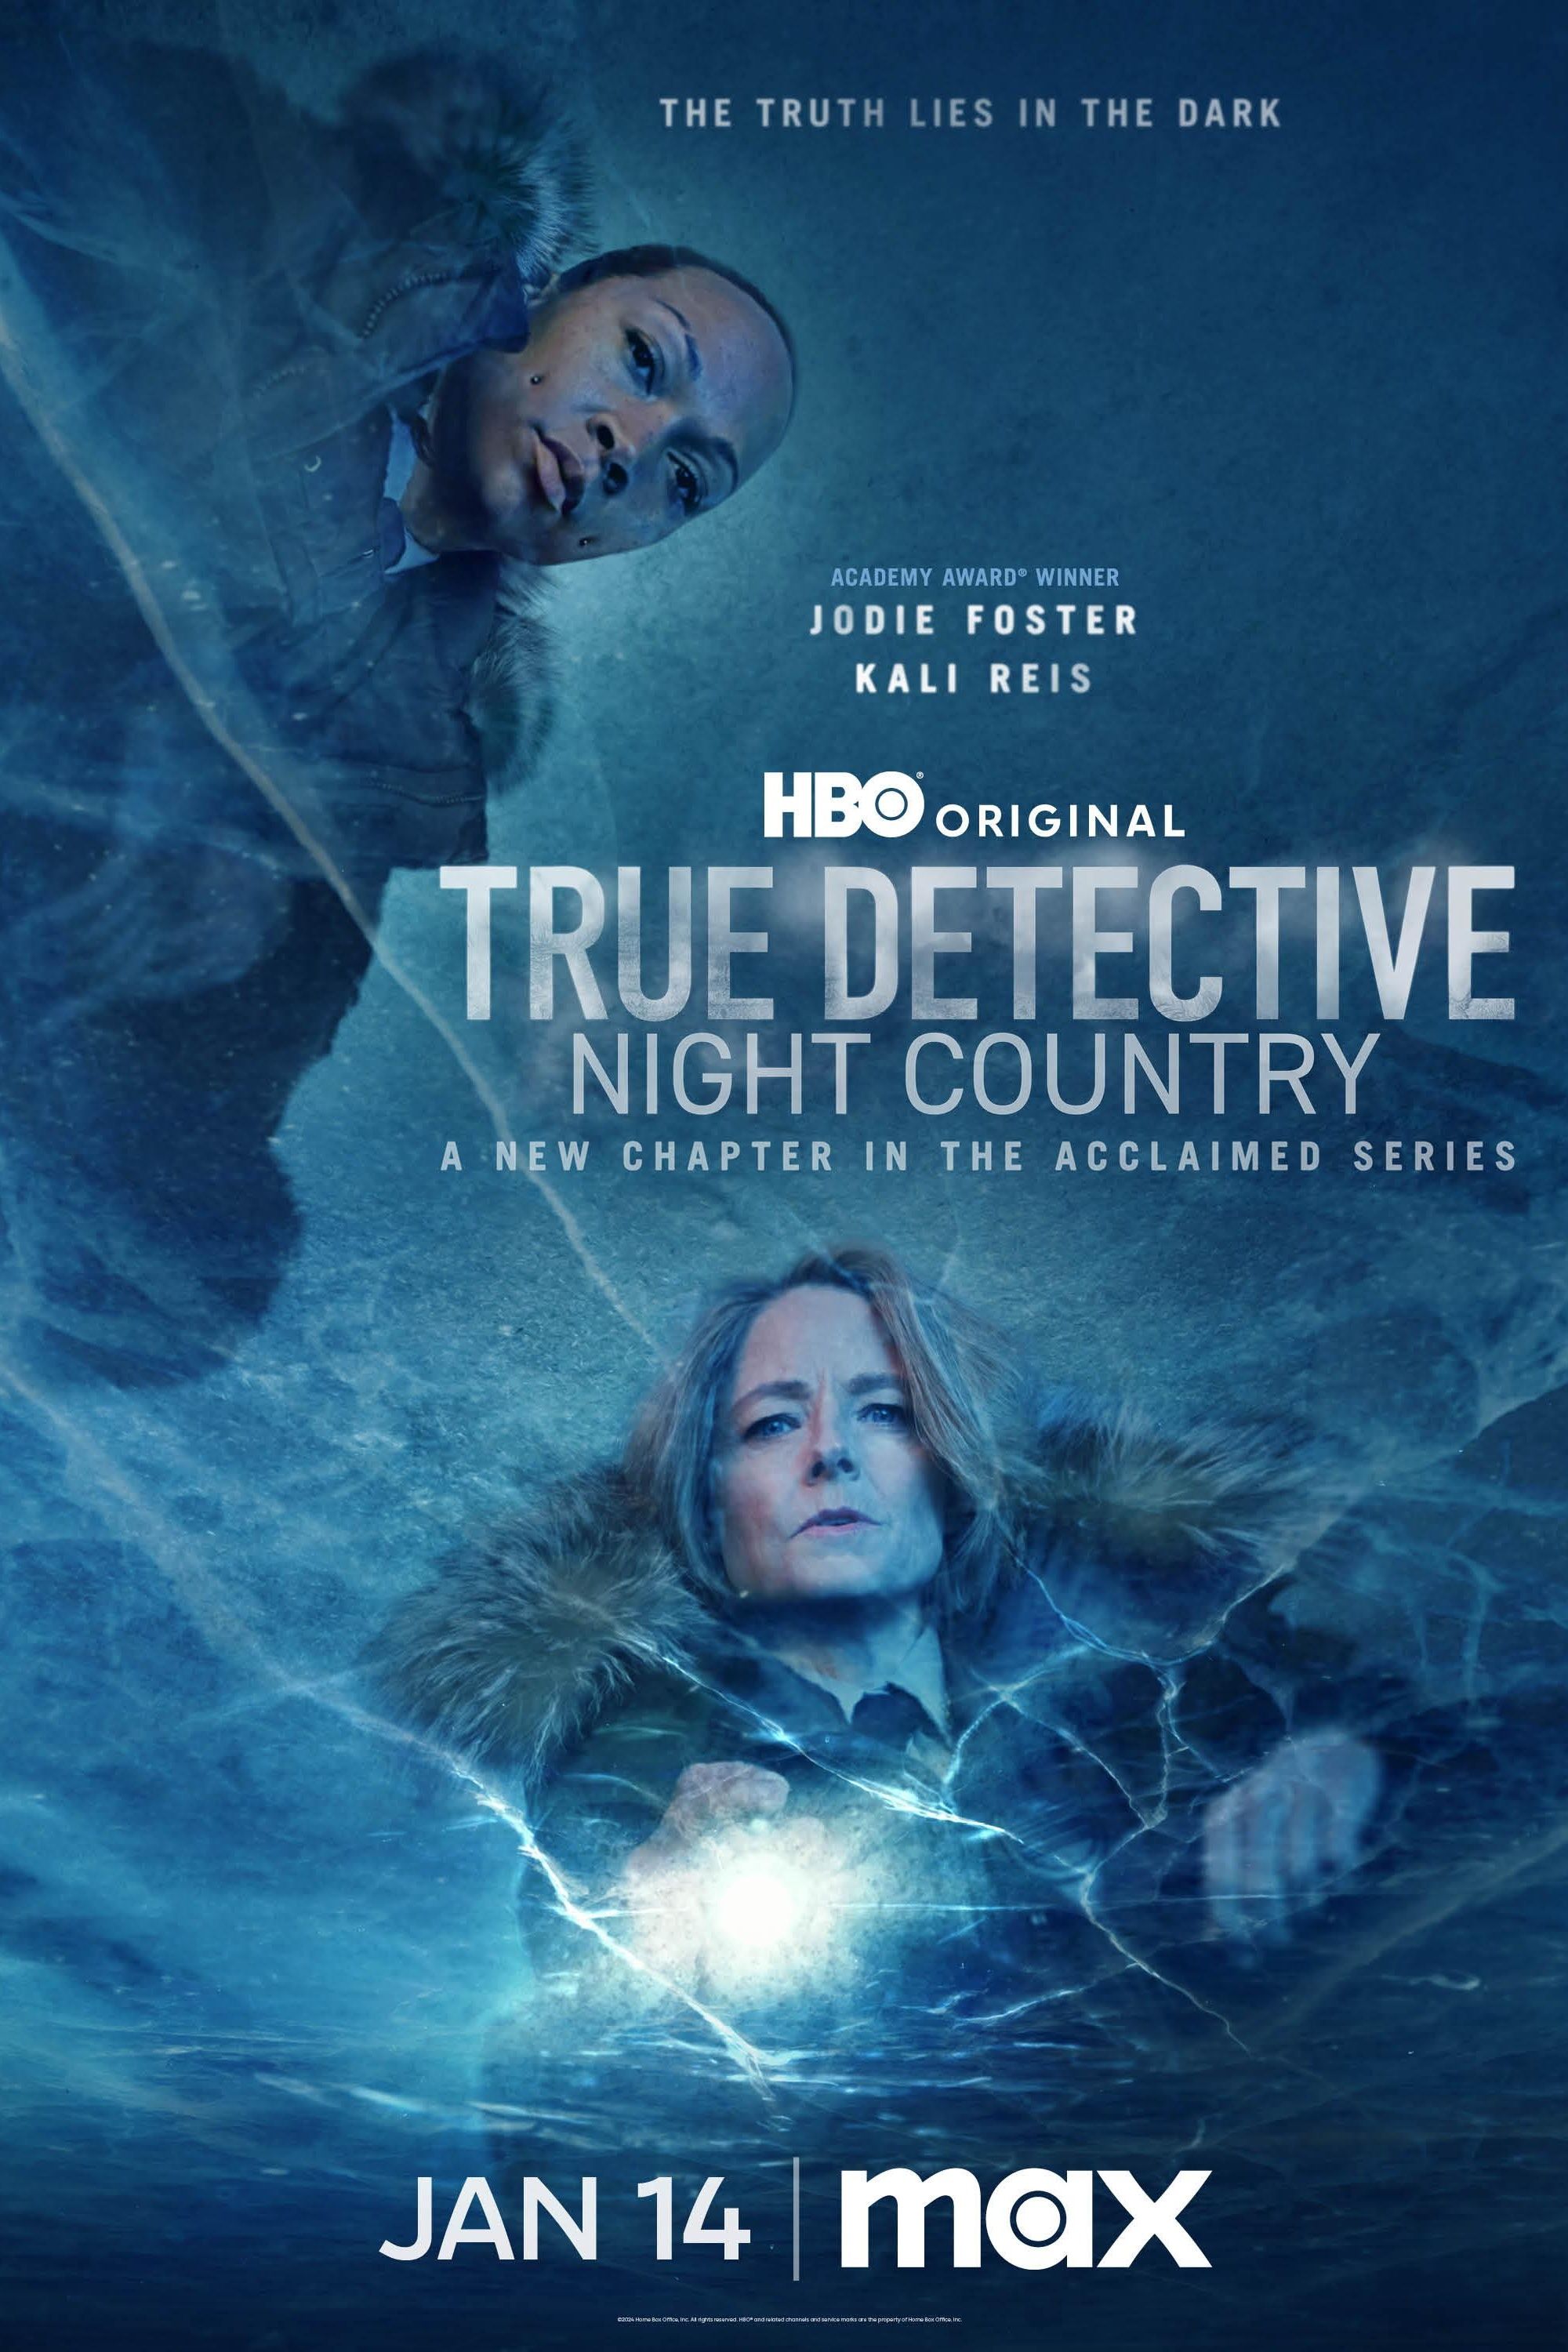 true detective poster Cropped (1)